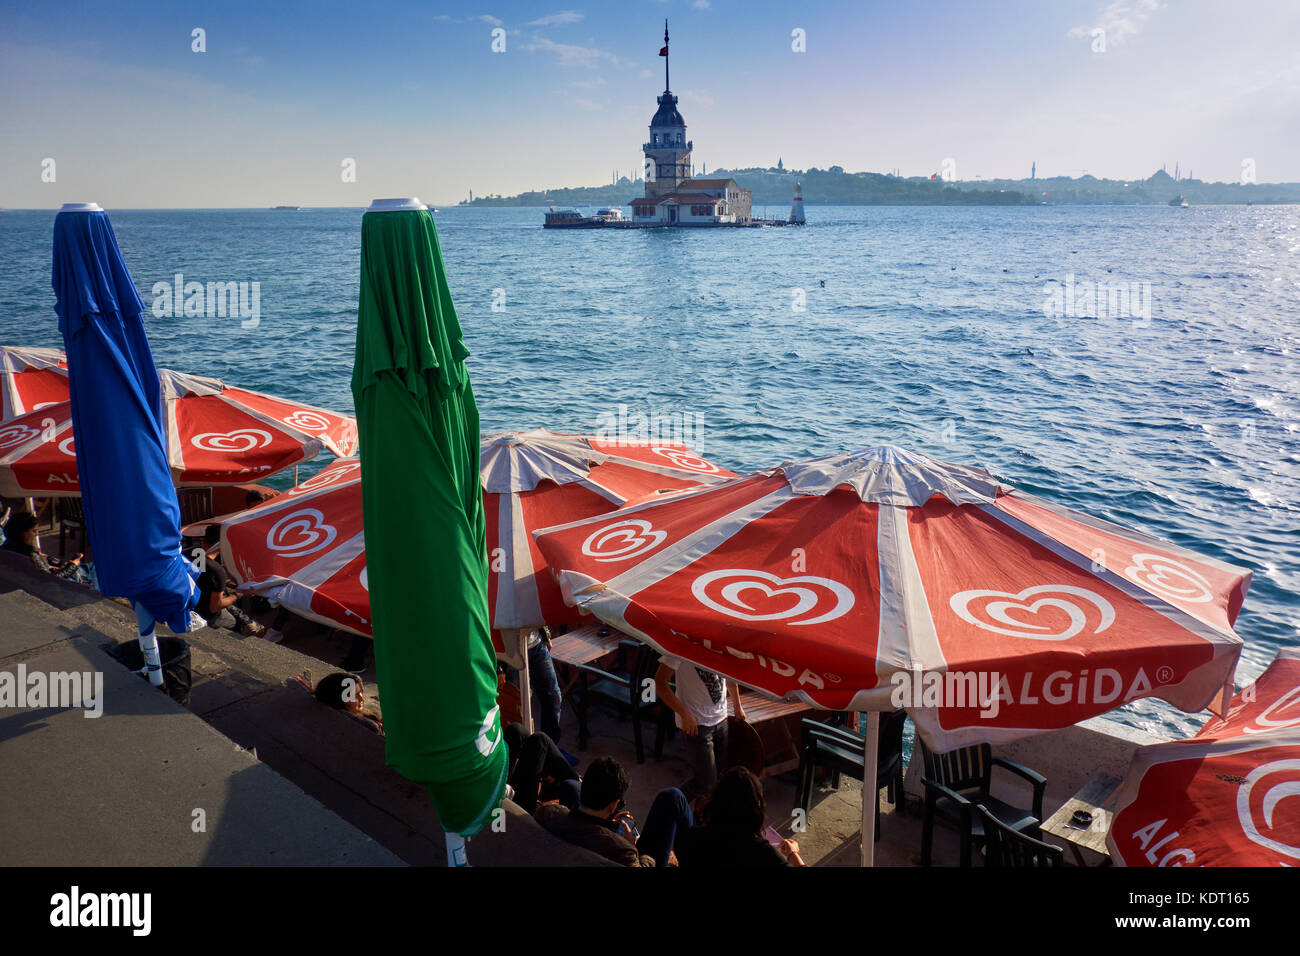 View of the Maiden's tower, with Istanbul at the background seen from Uskudar, at the southern entrance of the Bosporus. Istanbul. Turkey. Stock Photo